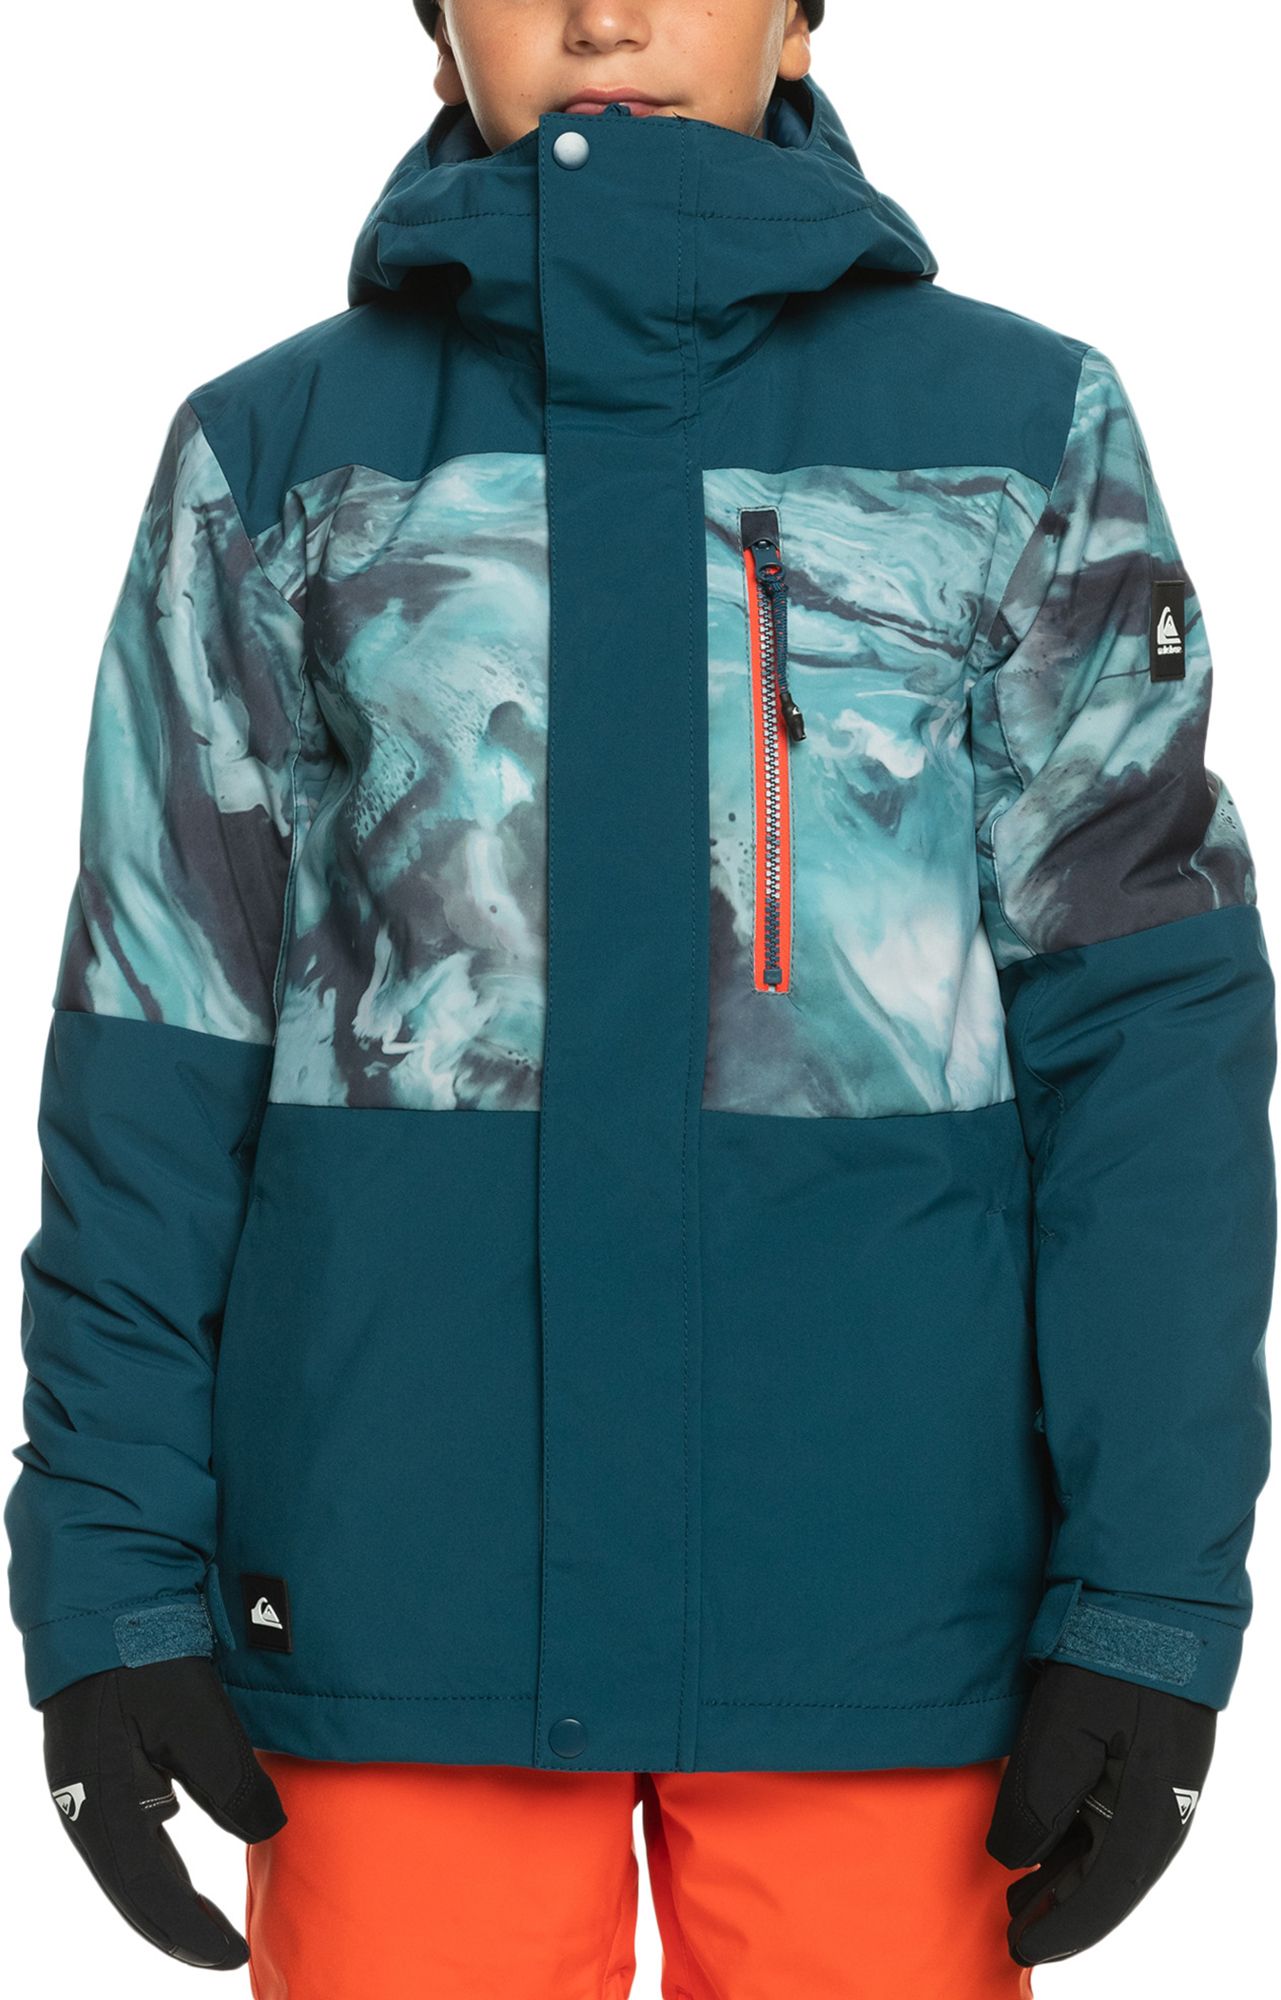 Quiksilver Quicksilver Boys Mission Printed Block Youth Snow Jacket